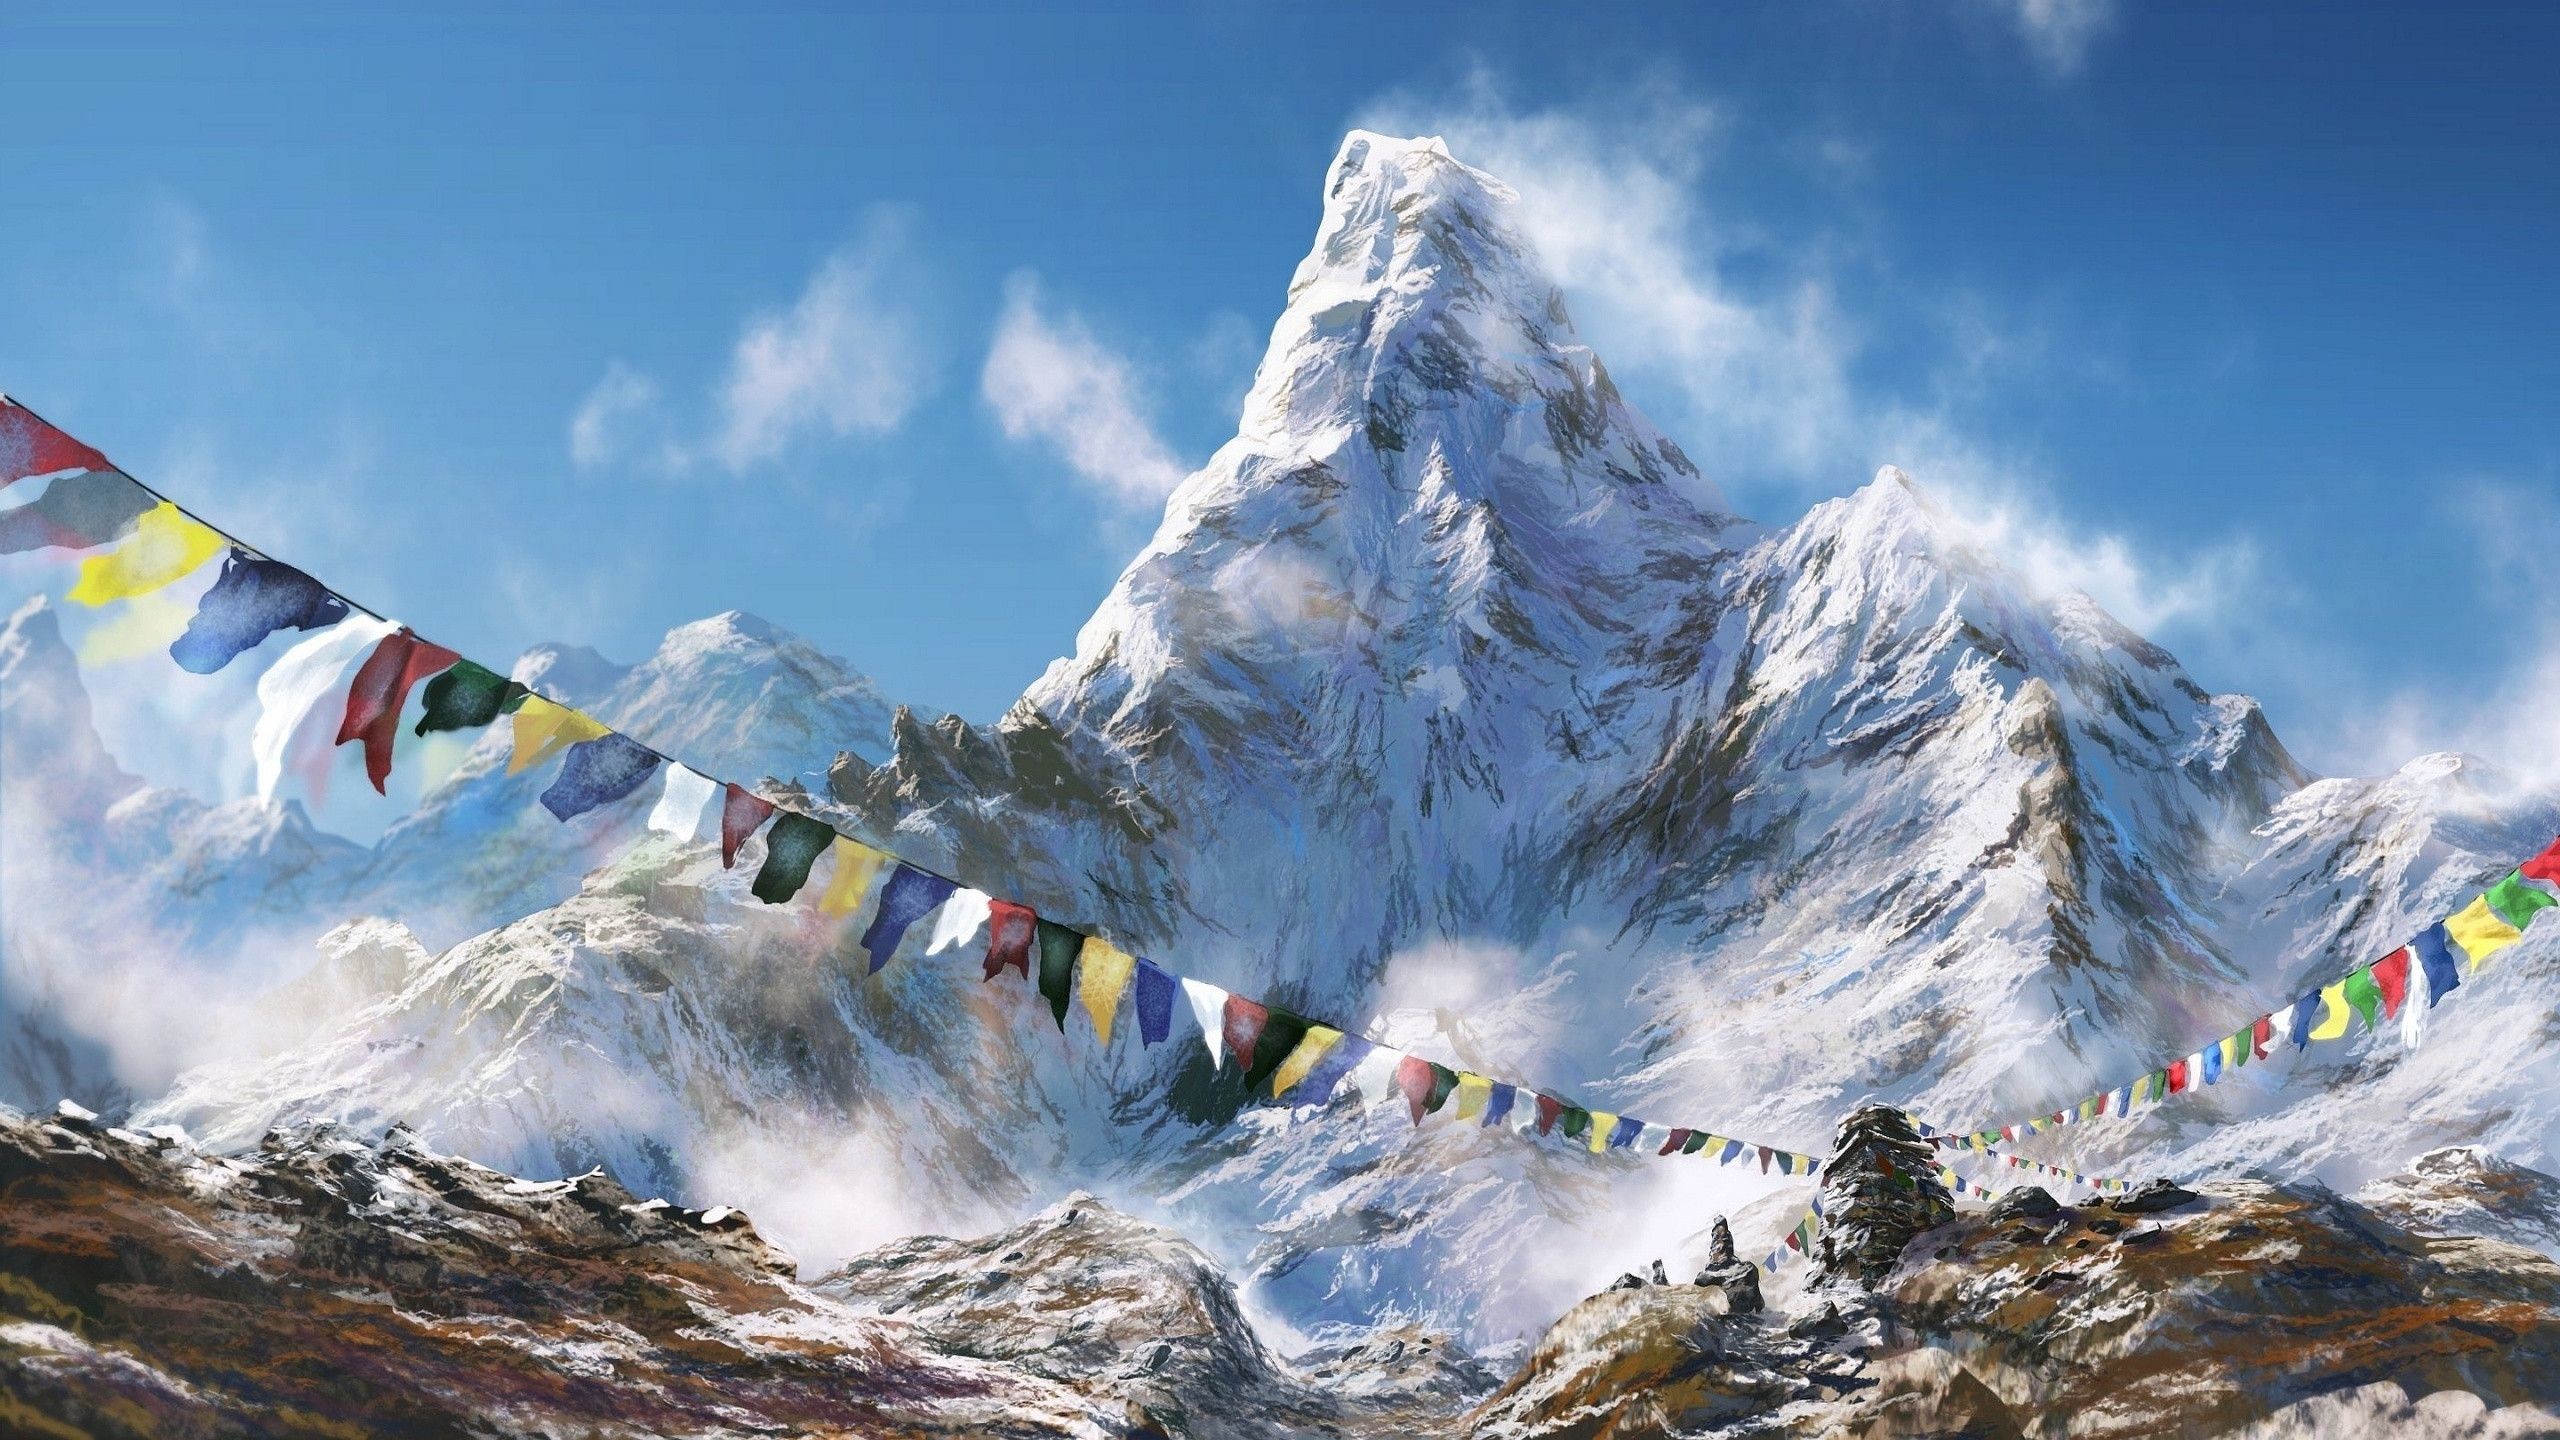 2560x1440 Mount Everest Nepal iPhone wallpapers backgrounds x